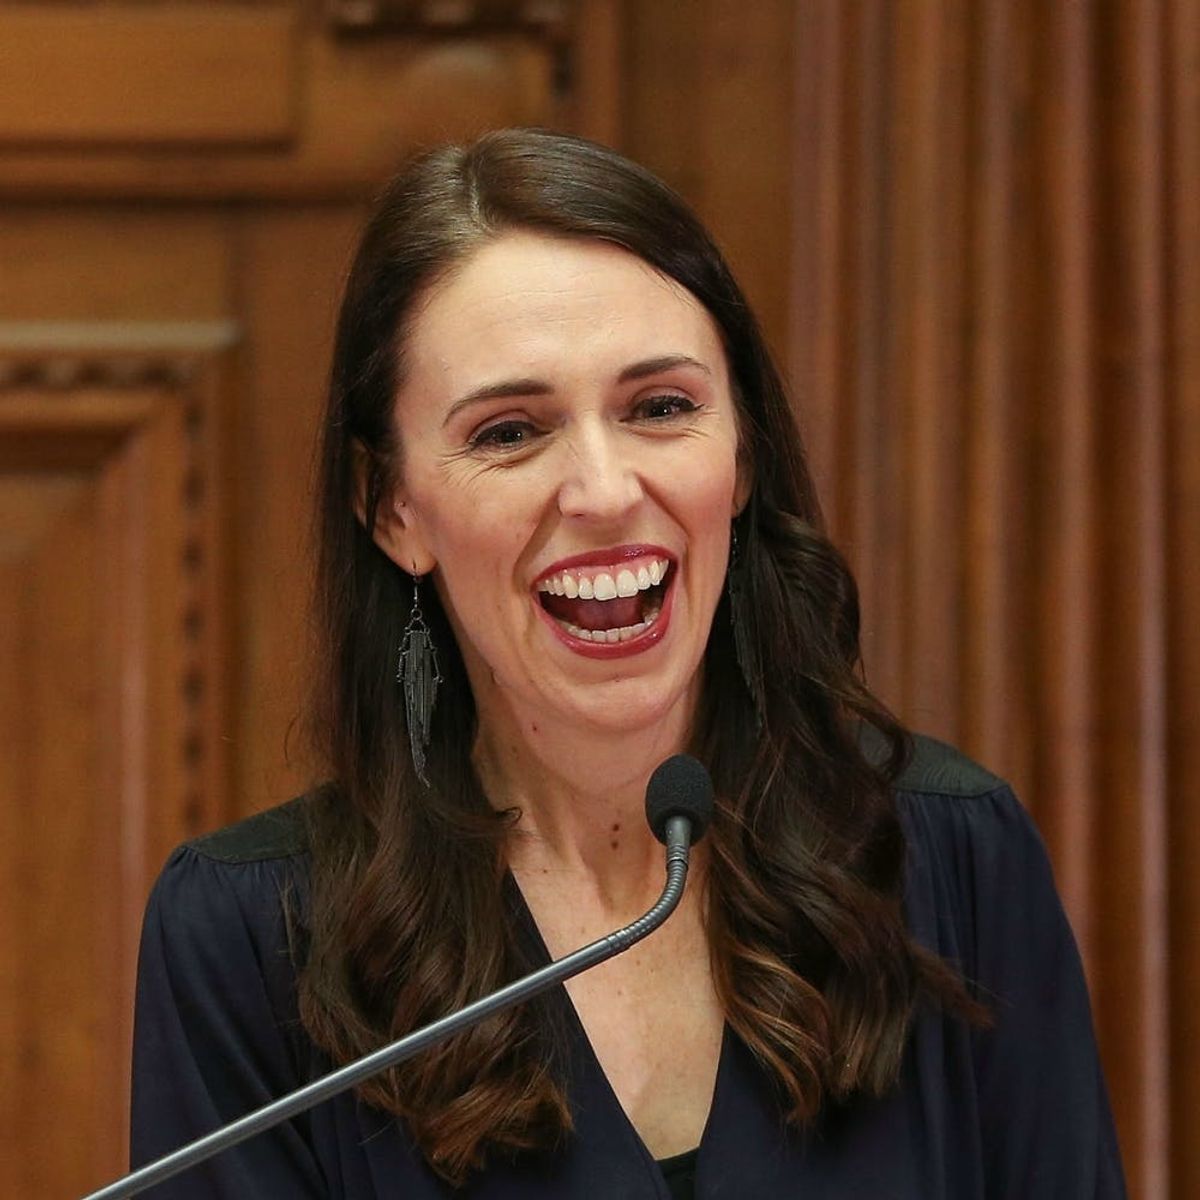 The Prime Minister of New Zealand Will Be the First World Leader in Nearly 30 Years to Give Birth While in Office